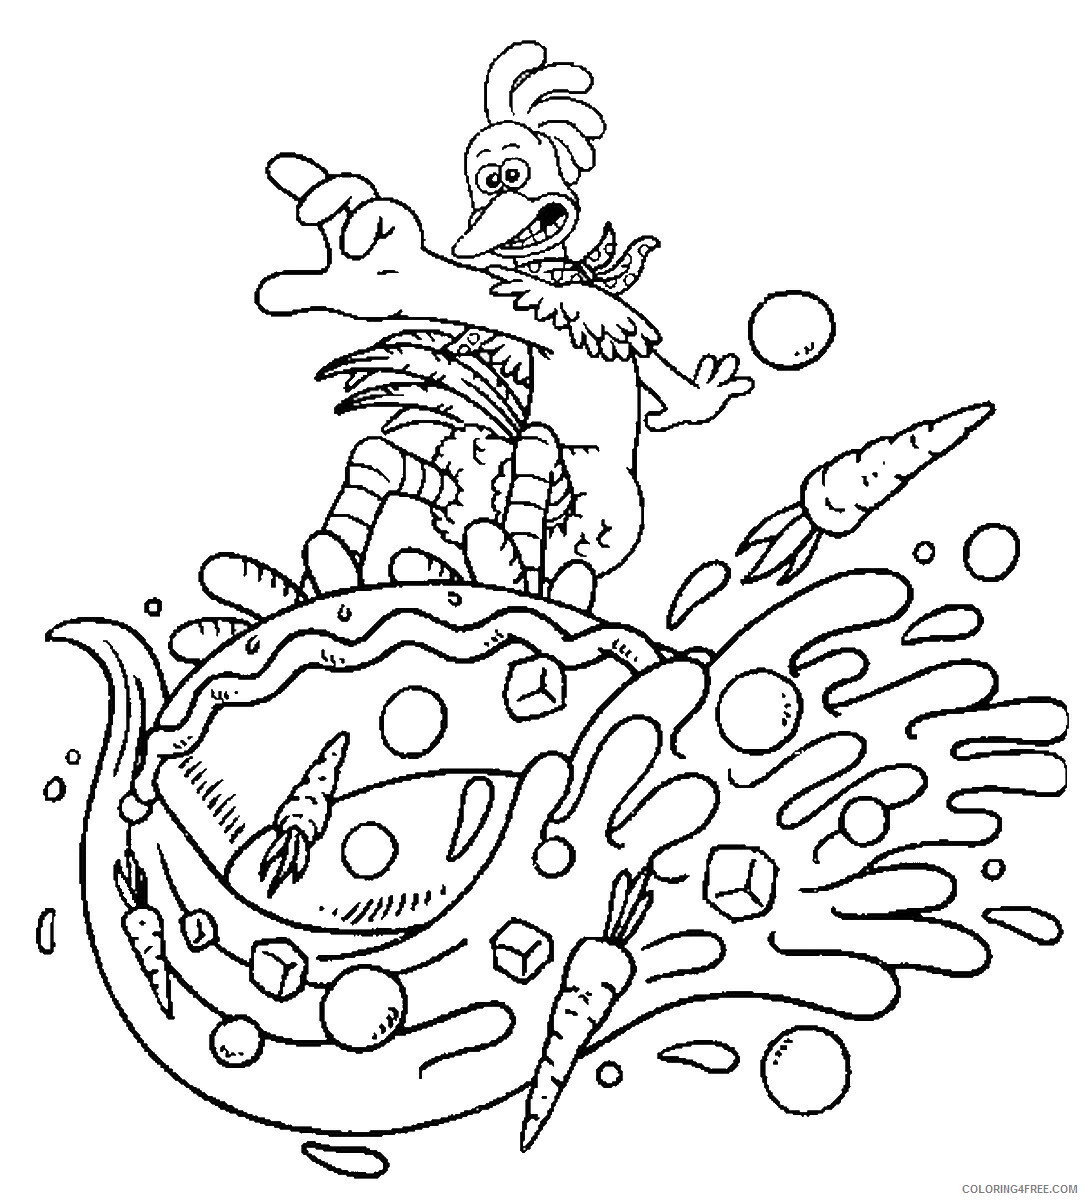 Chicken Run Coloring Pages TV Film chicken_run_cl22 Printable 2020 02121 Coloring4free